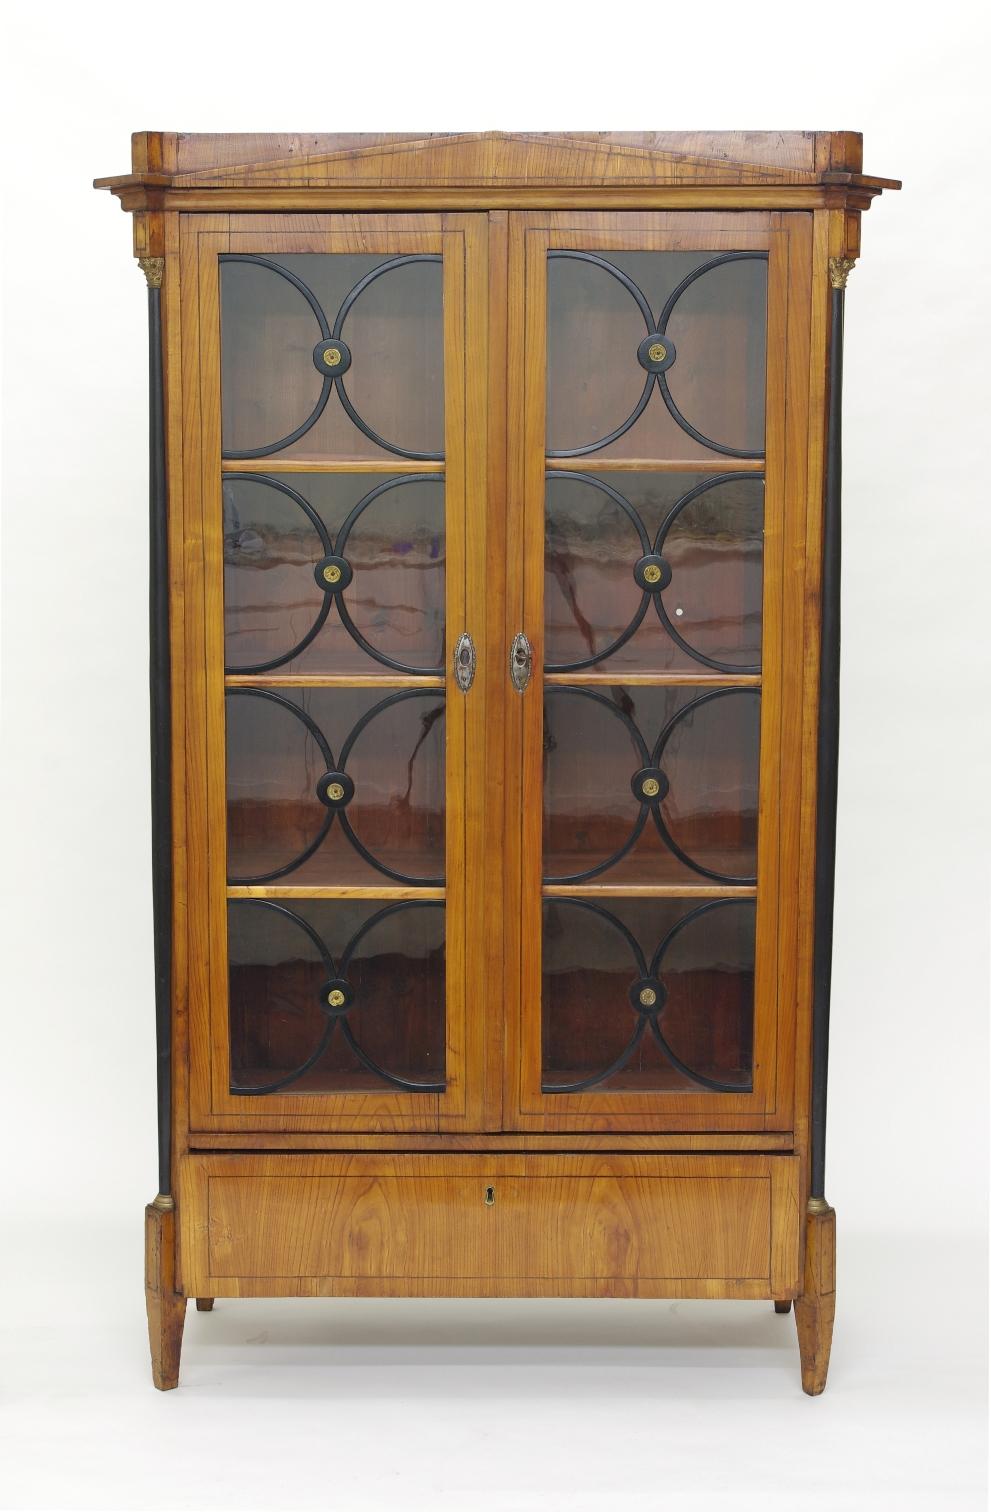 Biedermeier cherry bookcase, circa 1820. Biedermeier cherry bookcase/vitrine, the top with a projecting pediment over two doors, each with ebonized mullions and brass medallions opening to three adjustable shelves, the canted sides with ebonized